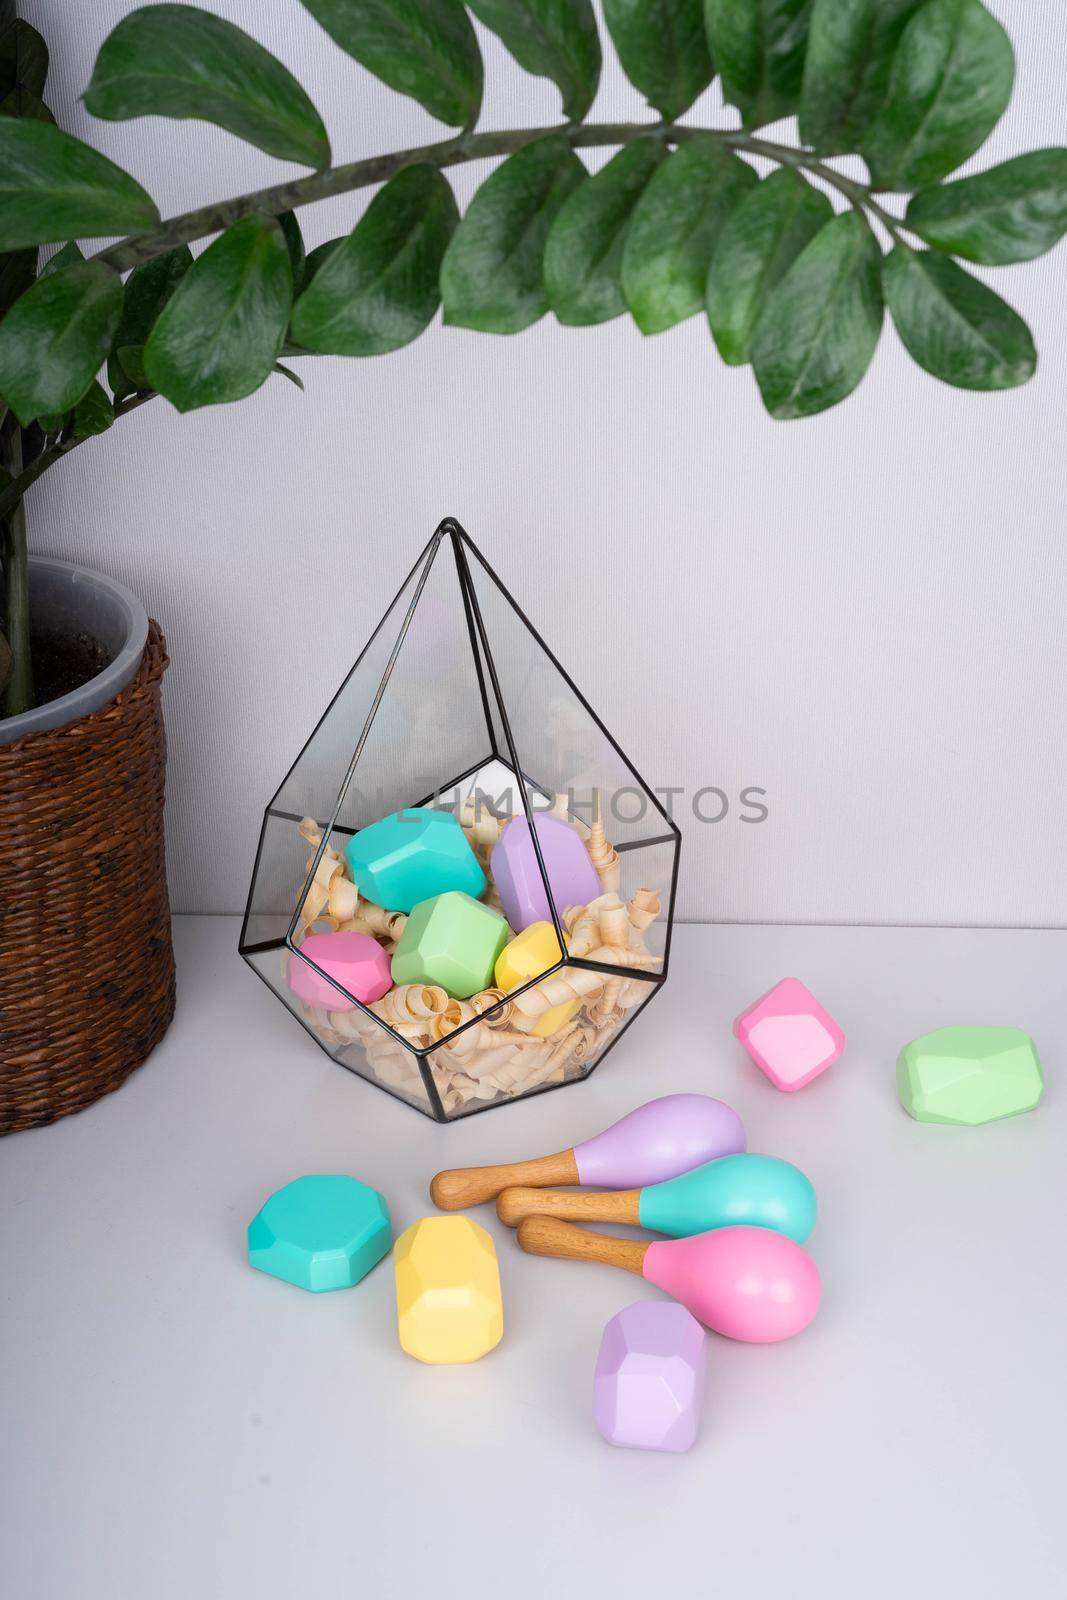 Children's wooden constructors in a glass florarium. Colored cubes of various shapes. Baby maracas. Green branch of houseplants.